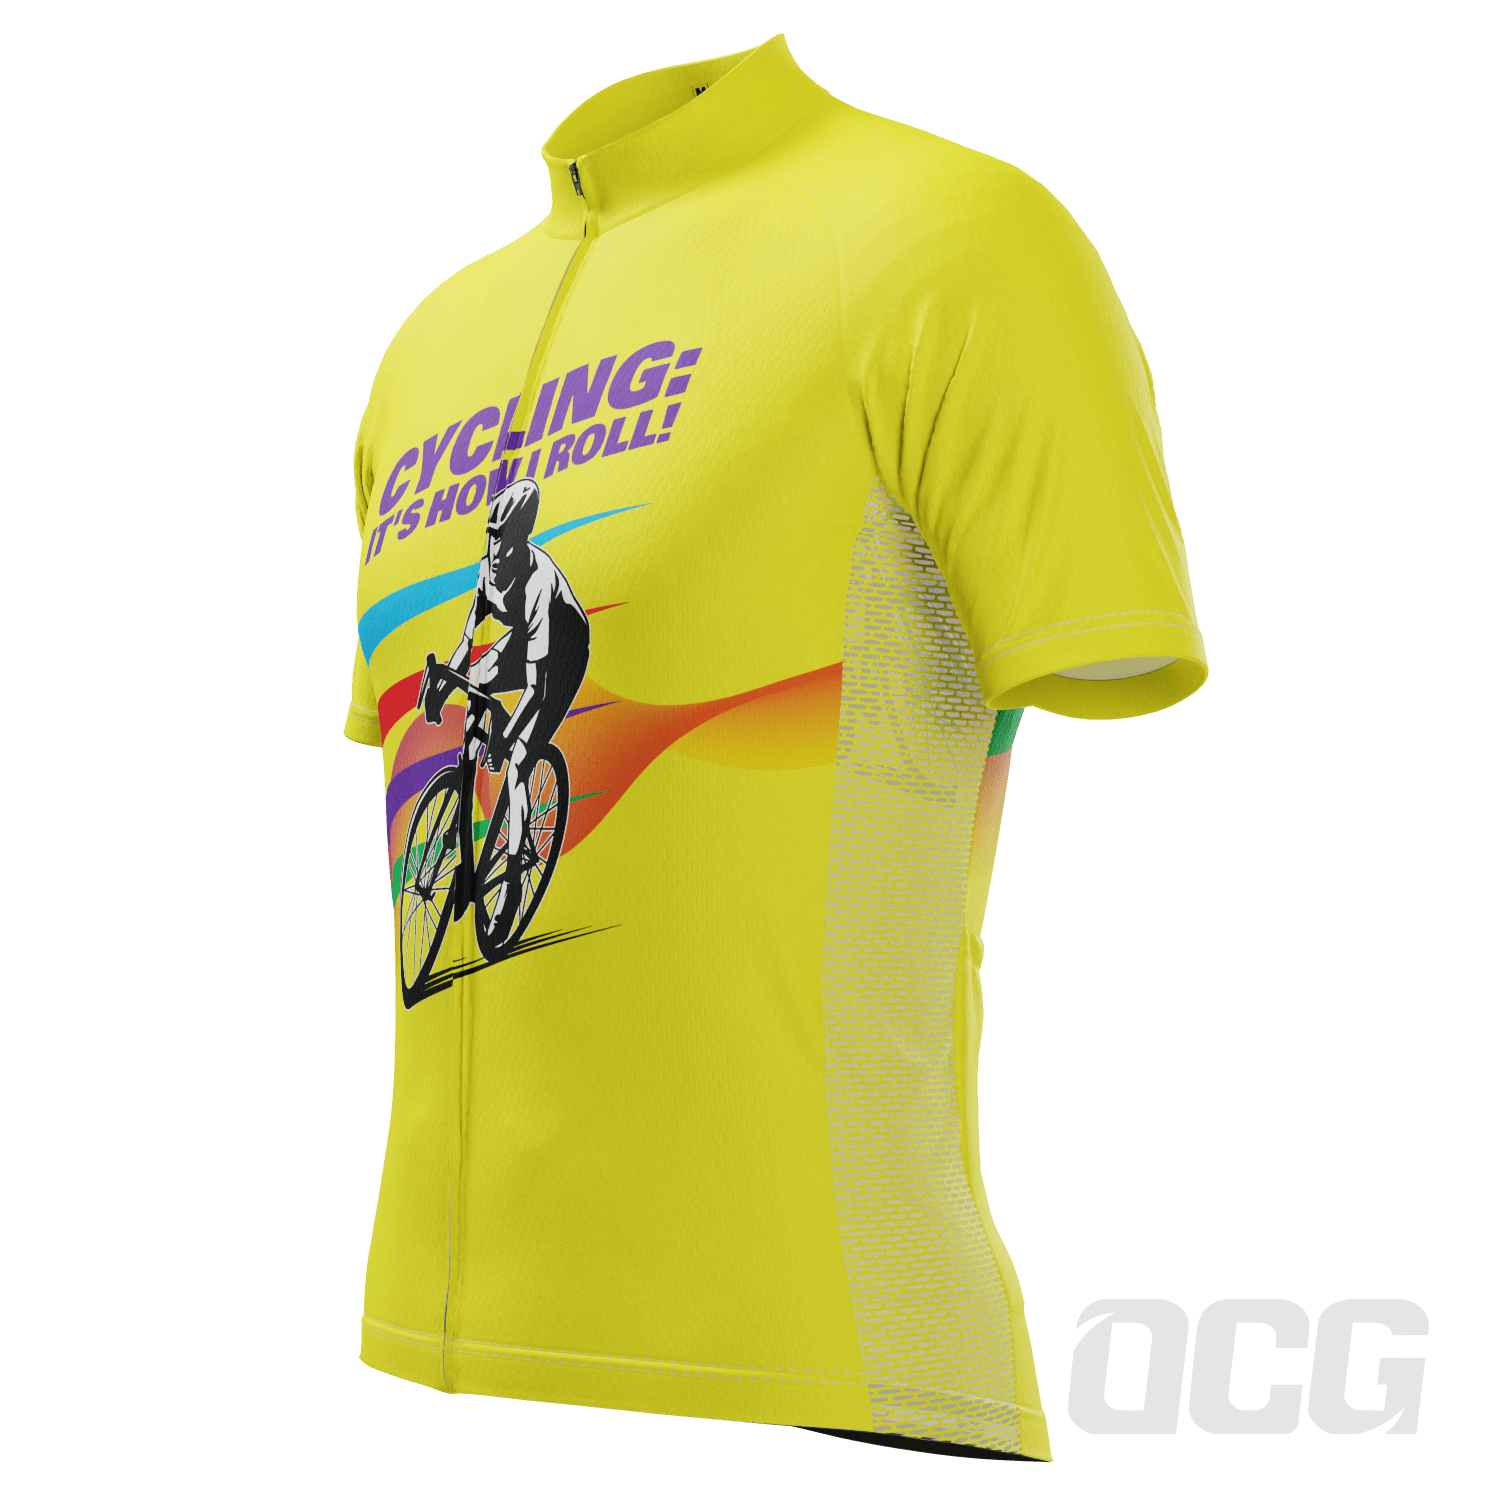 Men's Cycling: It's How I Roll! Short Sleeve Cycling Jersey